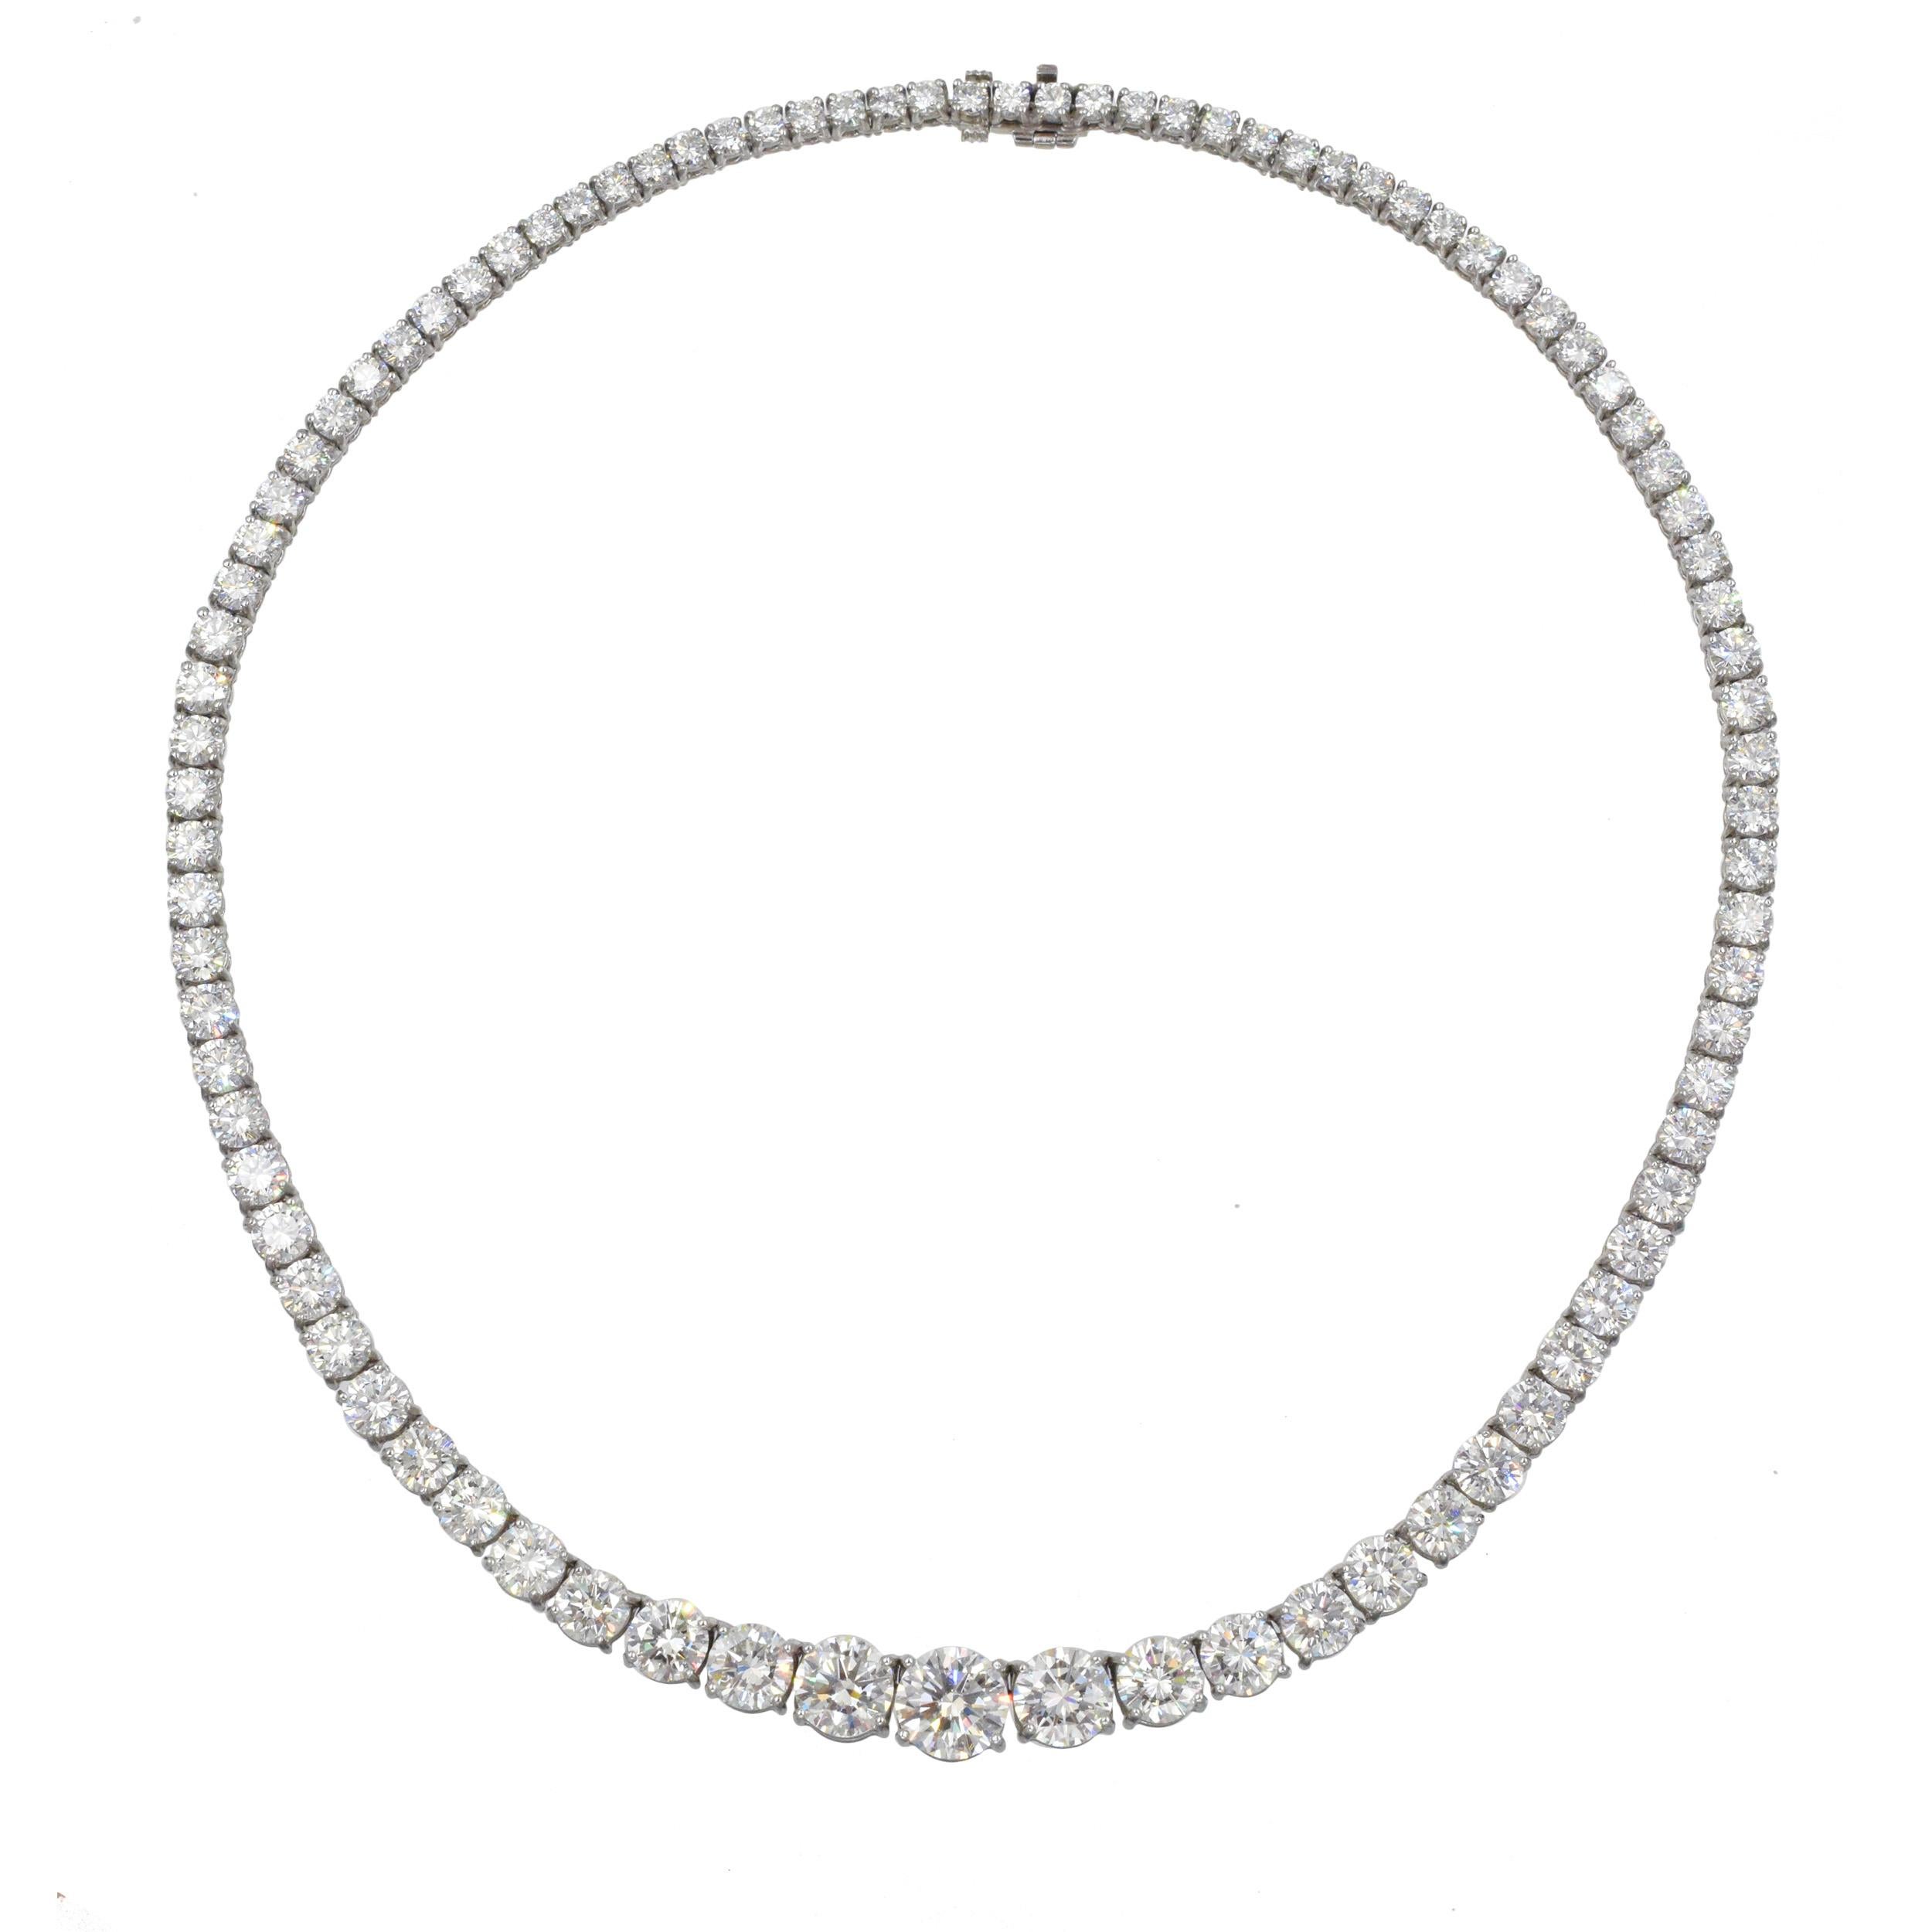 Tiffany & Co Platinum and Diamond Riviera Necklace This necklace has a round
diamond center weighing 2.26 cts., 2 round diamonds flanking center weighing a total of 2.92 cts., 86 round diamonds weighing 24.43 cts. (Color: F-H, VS) all set in